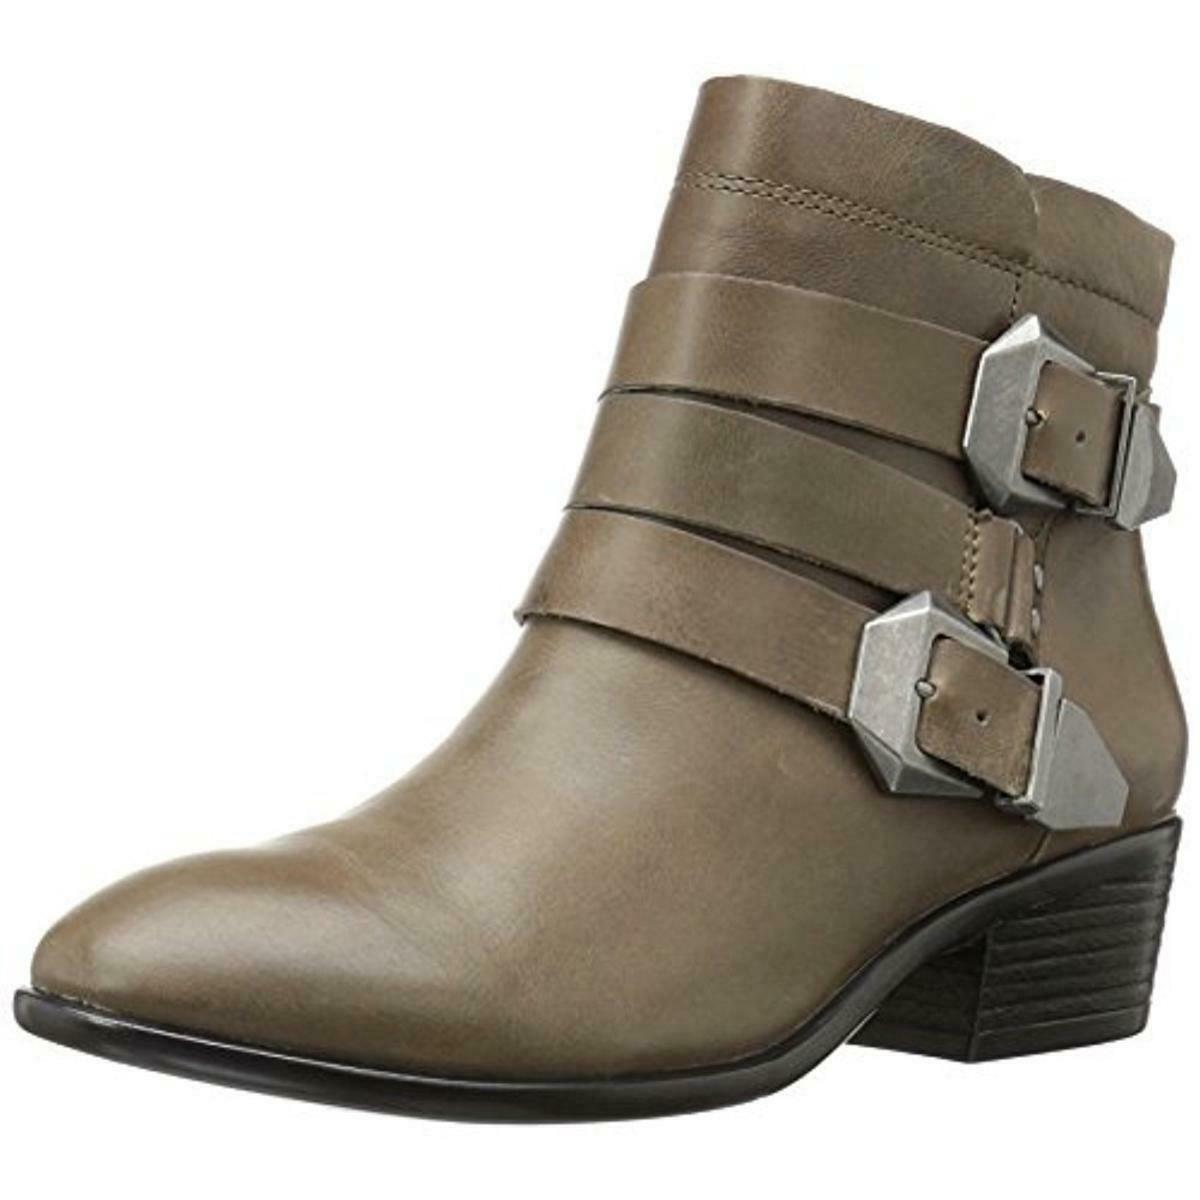 Aerosoles Womens My Time Taupe Belted Ankle Boots Shoes 5 Medium (B,M) BHFO 5970